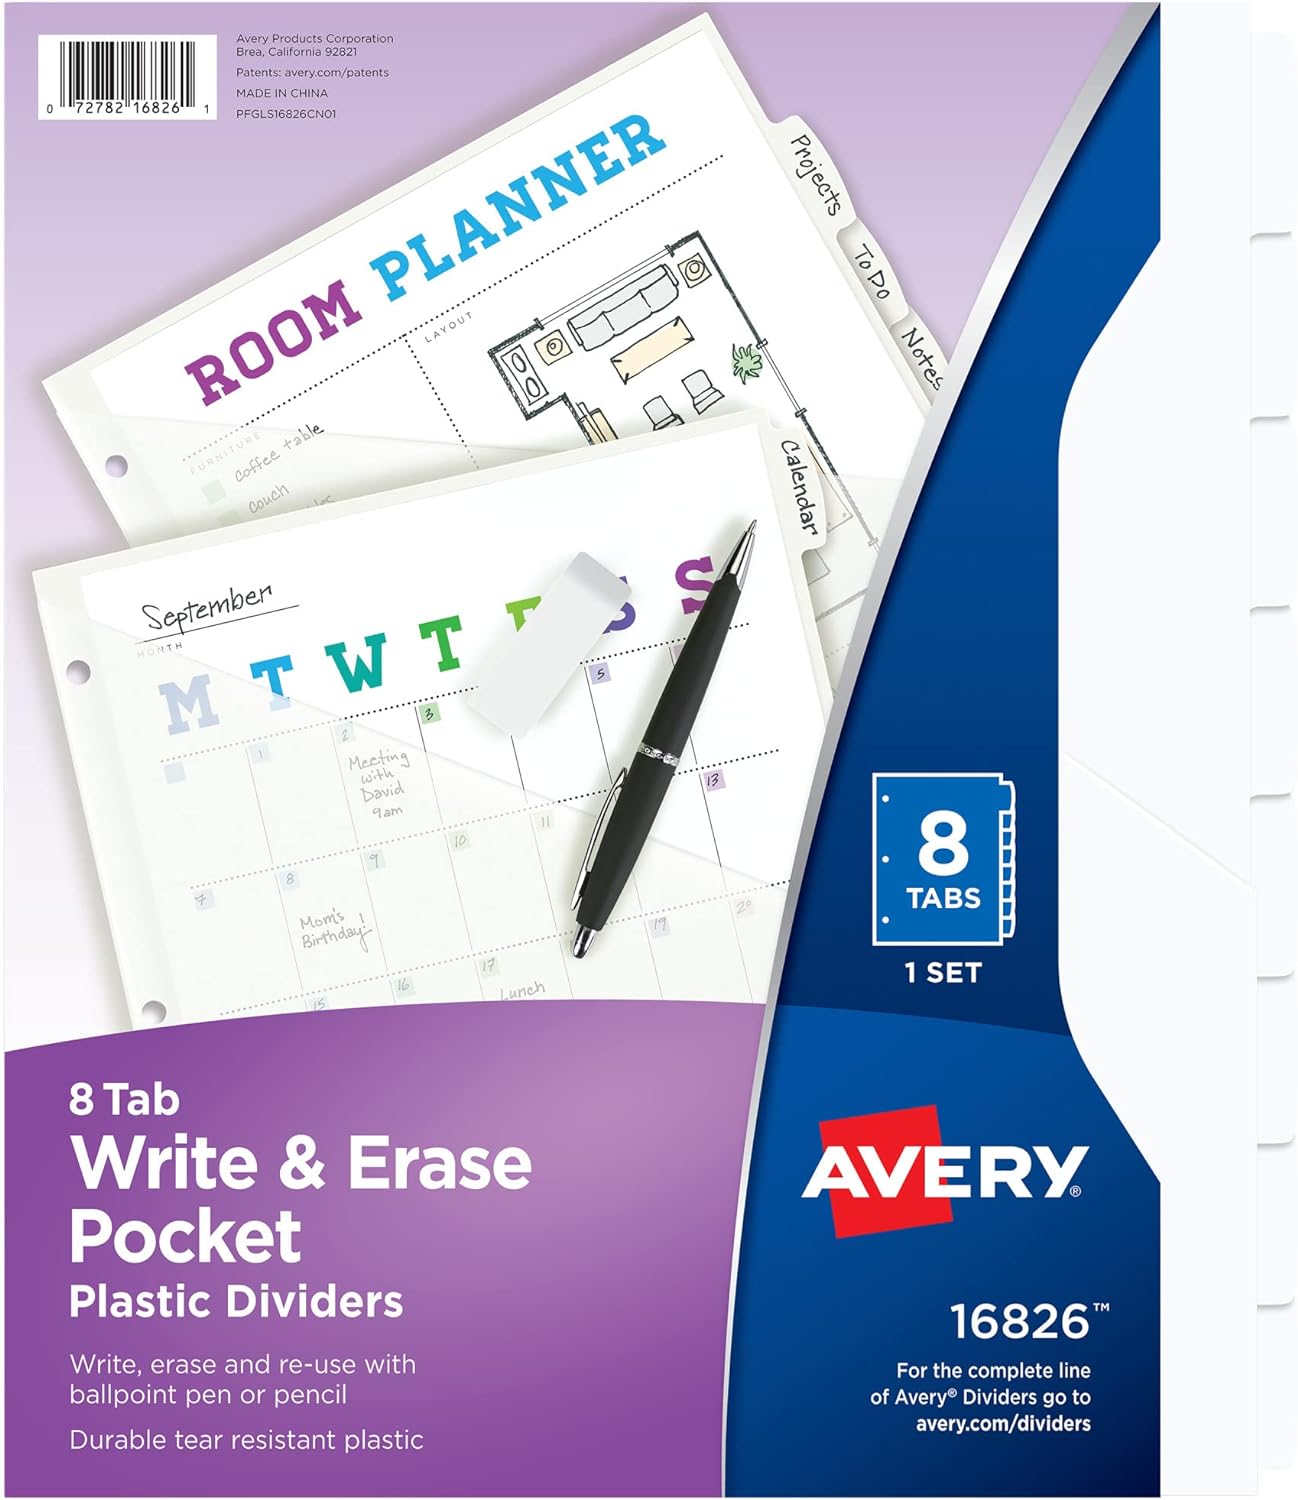 Avery Durable Plastic 8 Tab Write & Erase Dividers for 3 Ring Binders, Slash Pocket, Translucent White, Works with Sheet Protectors, 1 Set (16826)